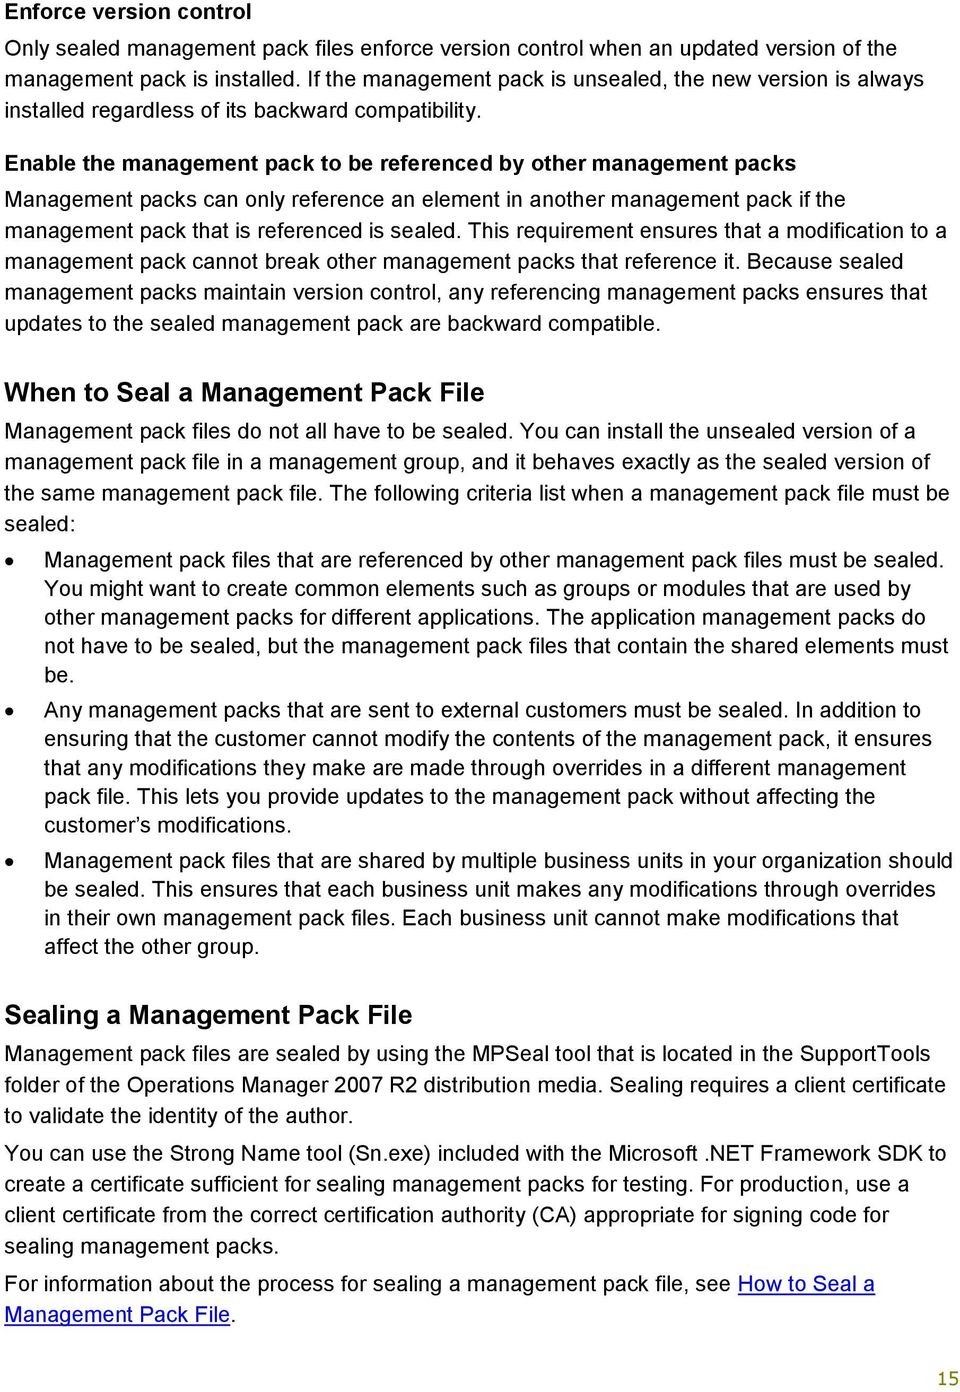 Enable the management pack to be referenced by other management packs Management packs can only reference an element in another management pack if the management pack that is referenced is sealed.